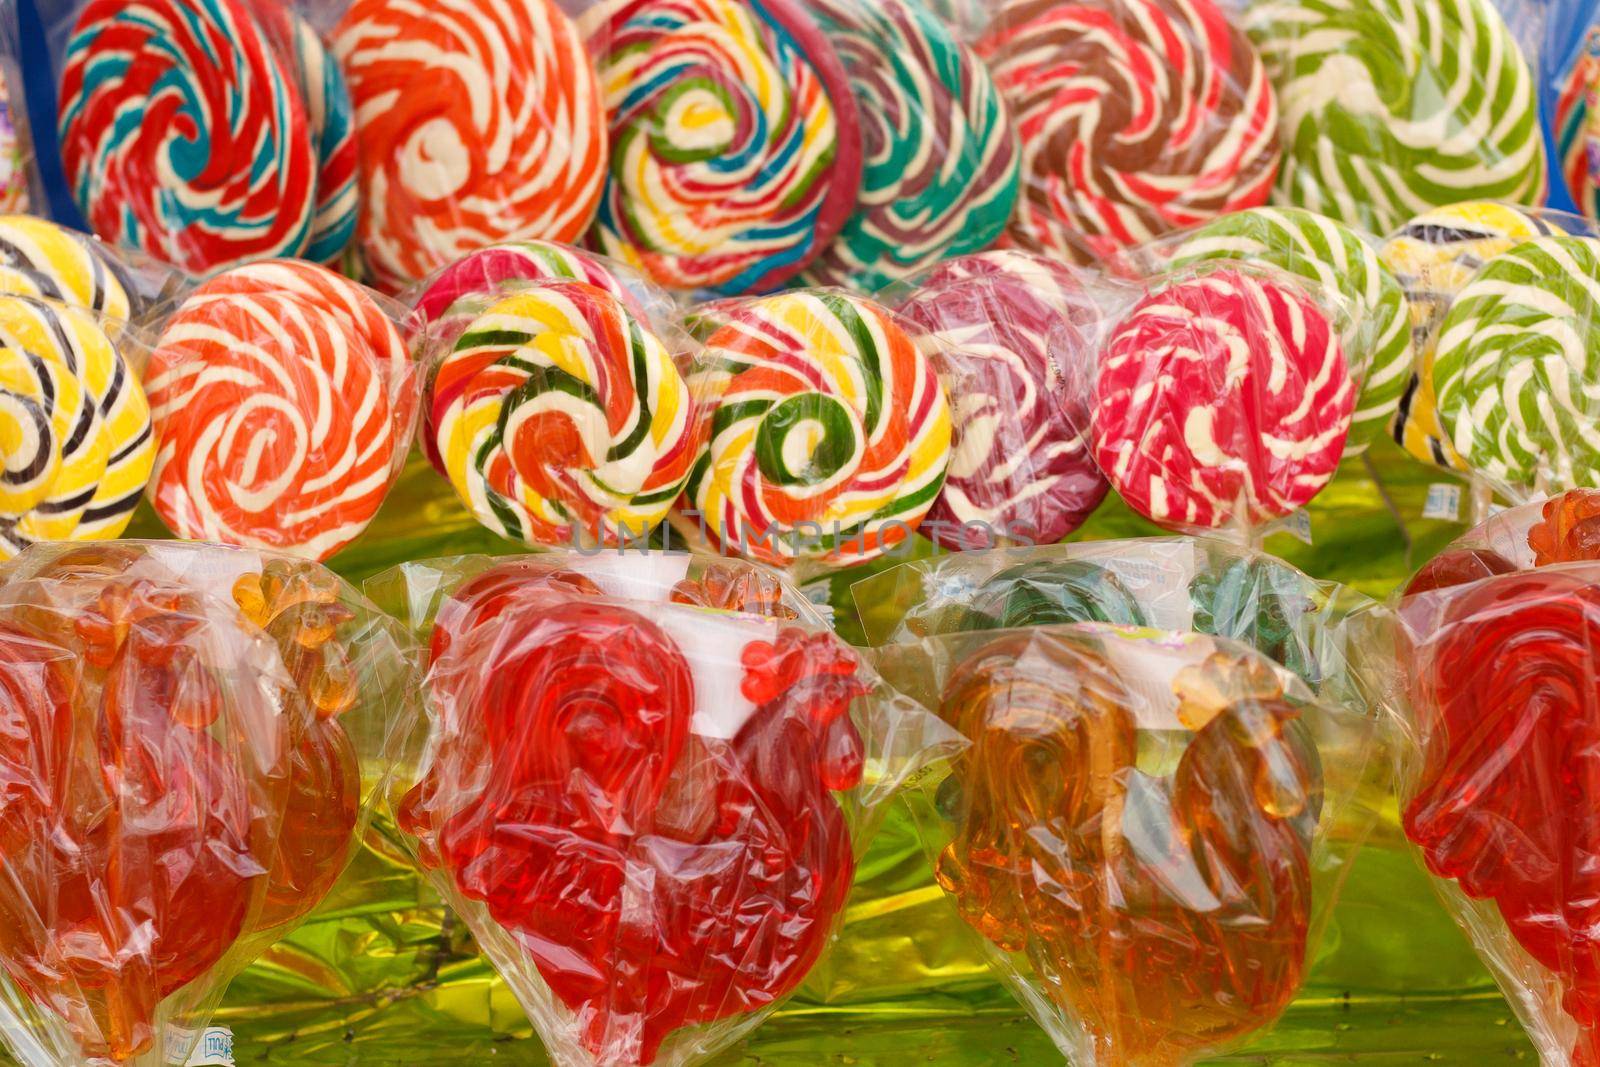 Colorful lollipops in a package. Lots of lollipops on the counter.Selective focus by lara29